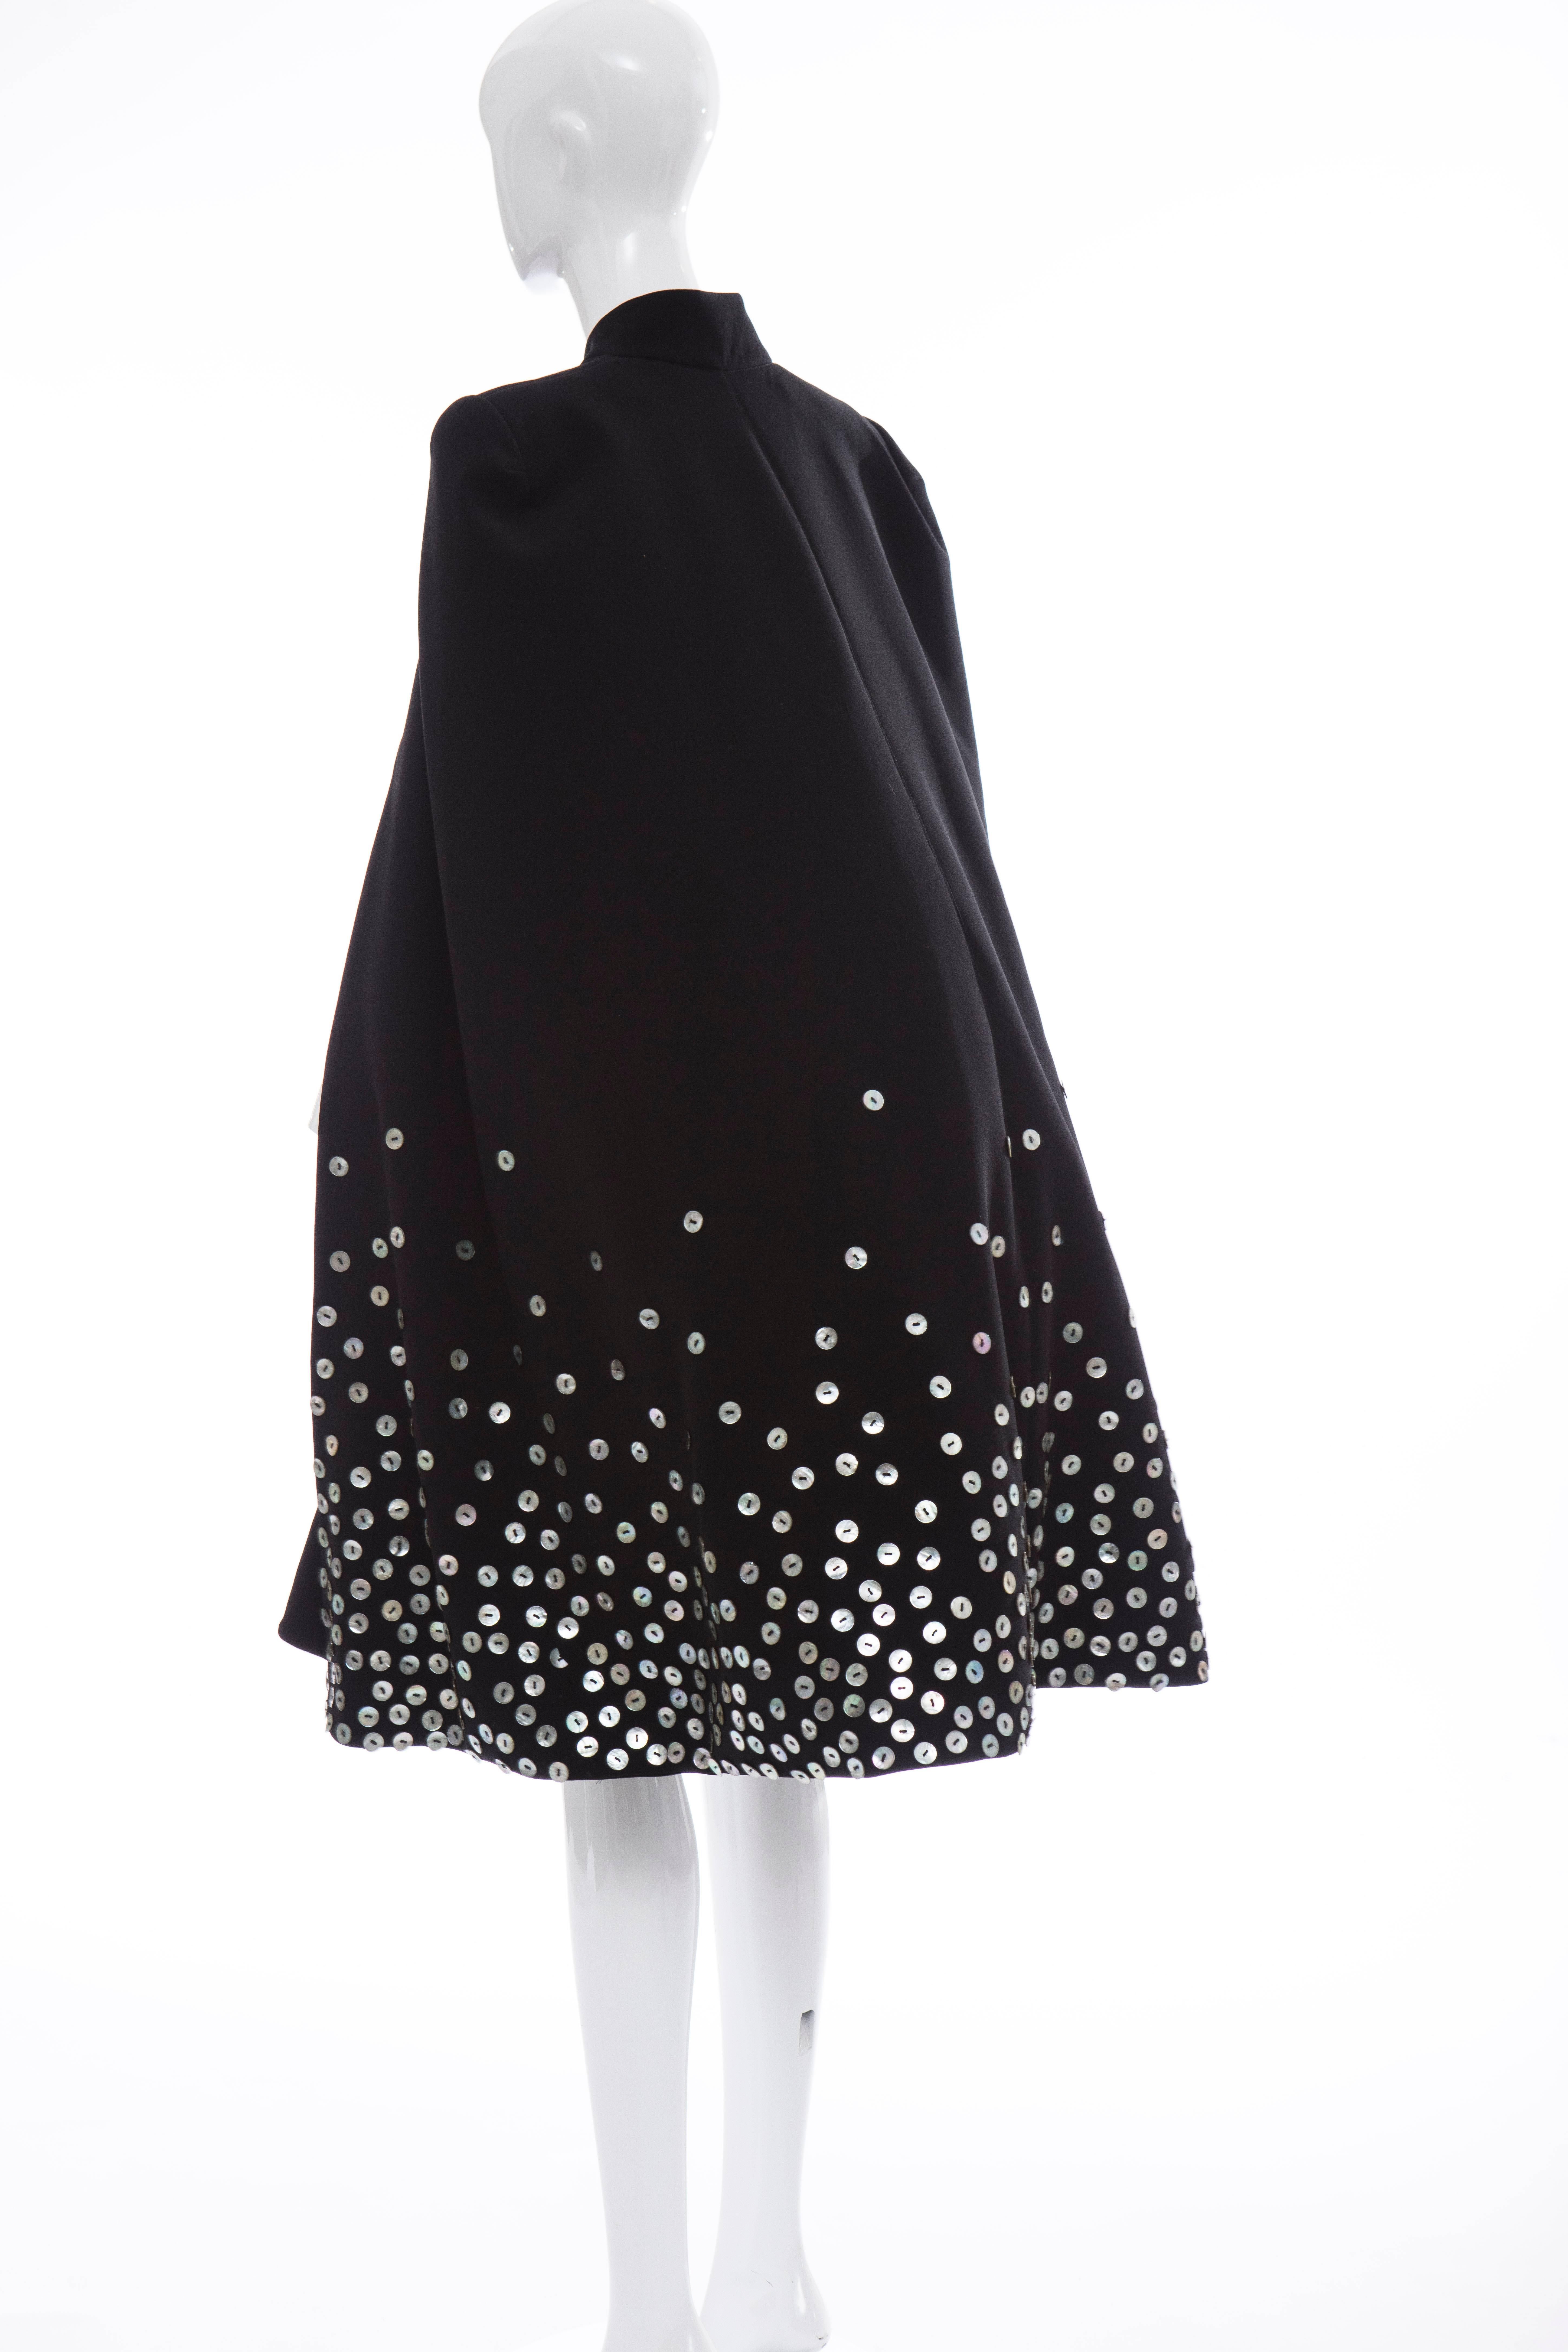 Gareth Pugh Zip Front Black Dress With Mother of Pearl Cape, Spring 2015 For Sale 4